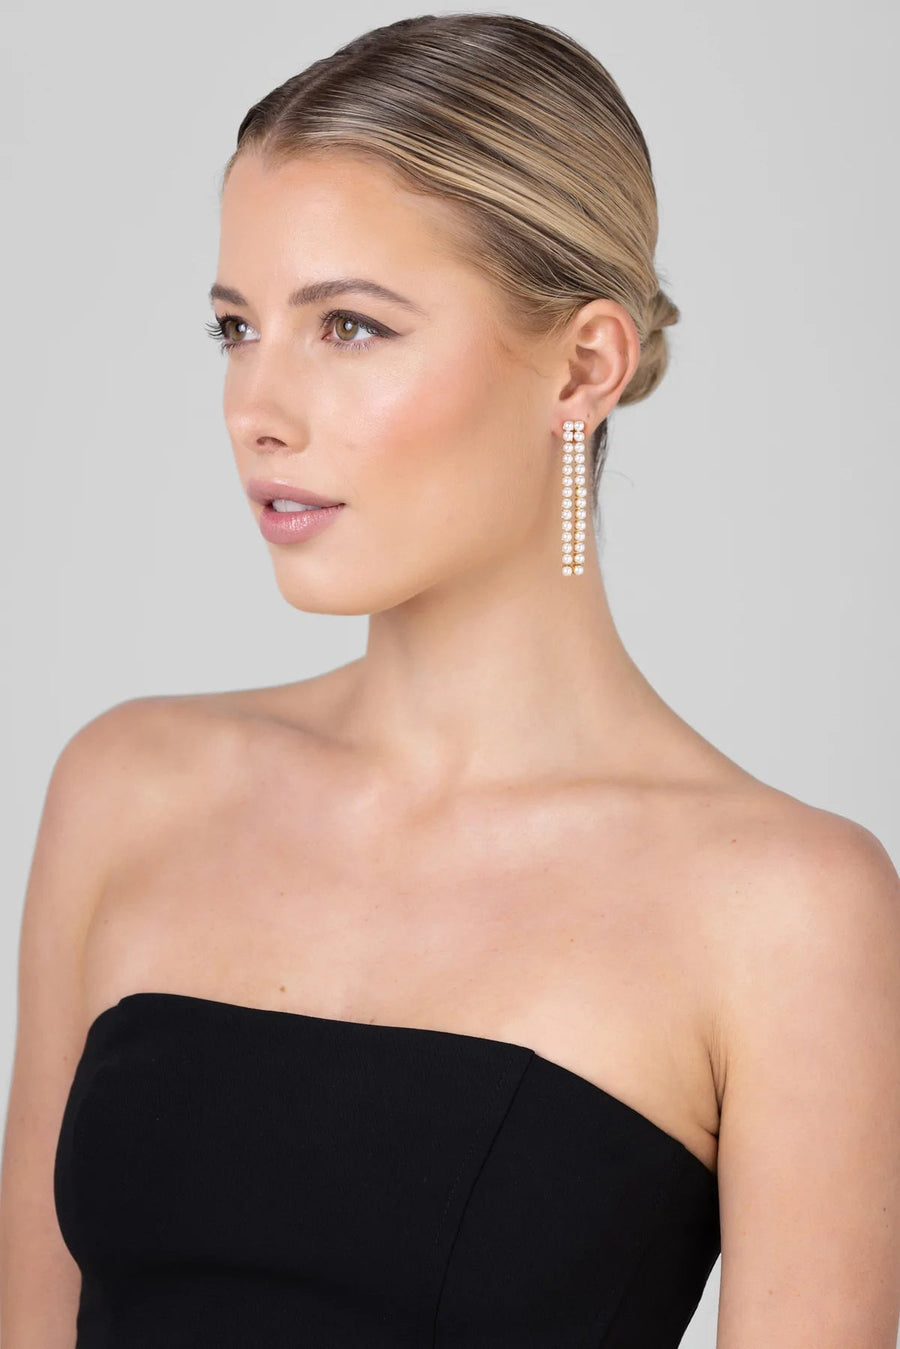 Shop Garland Gold Pearl Earrings - At Kohl and Soda | Ready To Ship!